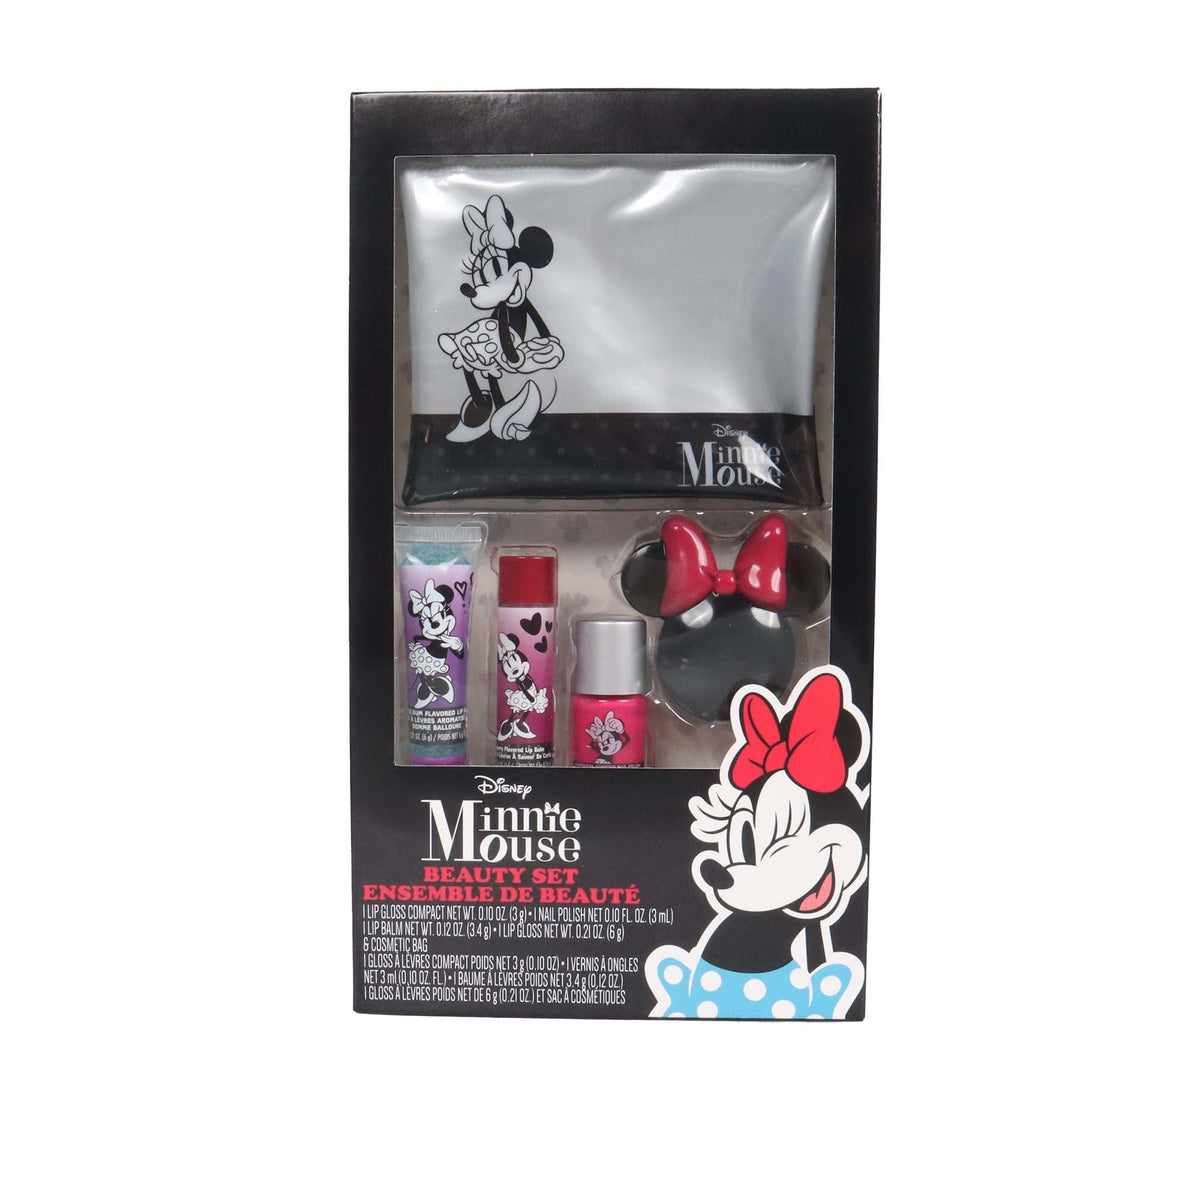 DANAWARES Kids Birthday Minnie Mouse Beauty Set with Pouch, 1 Count 059562480263